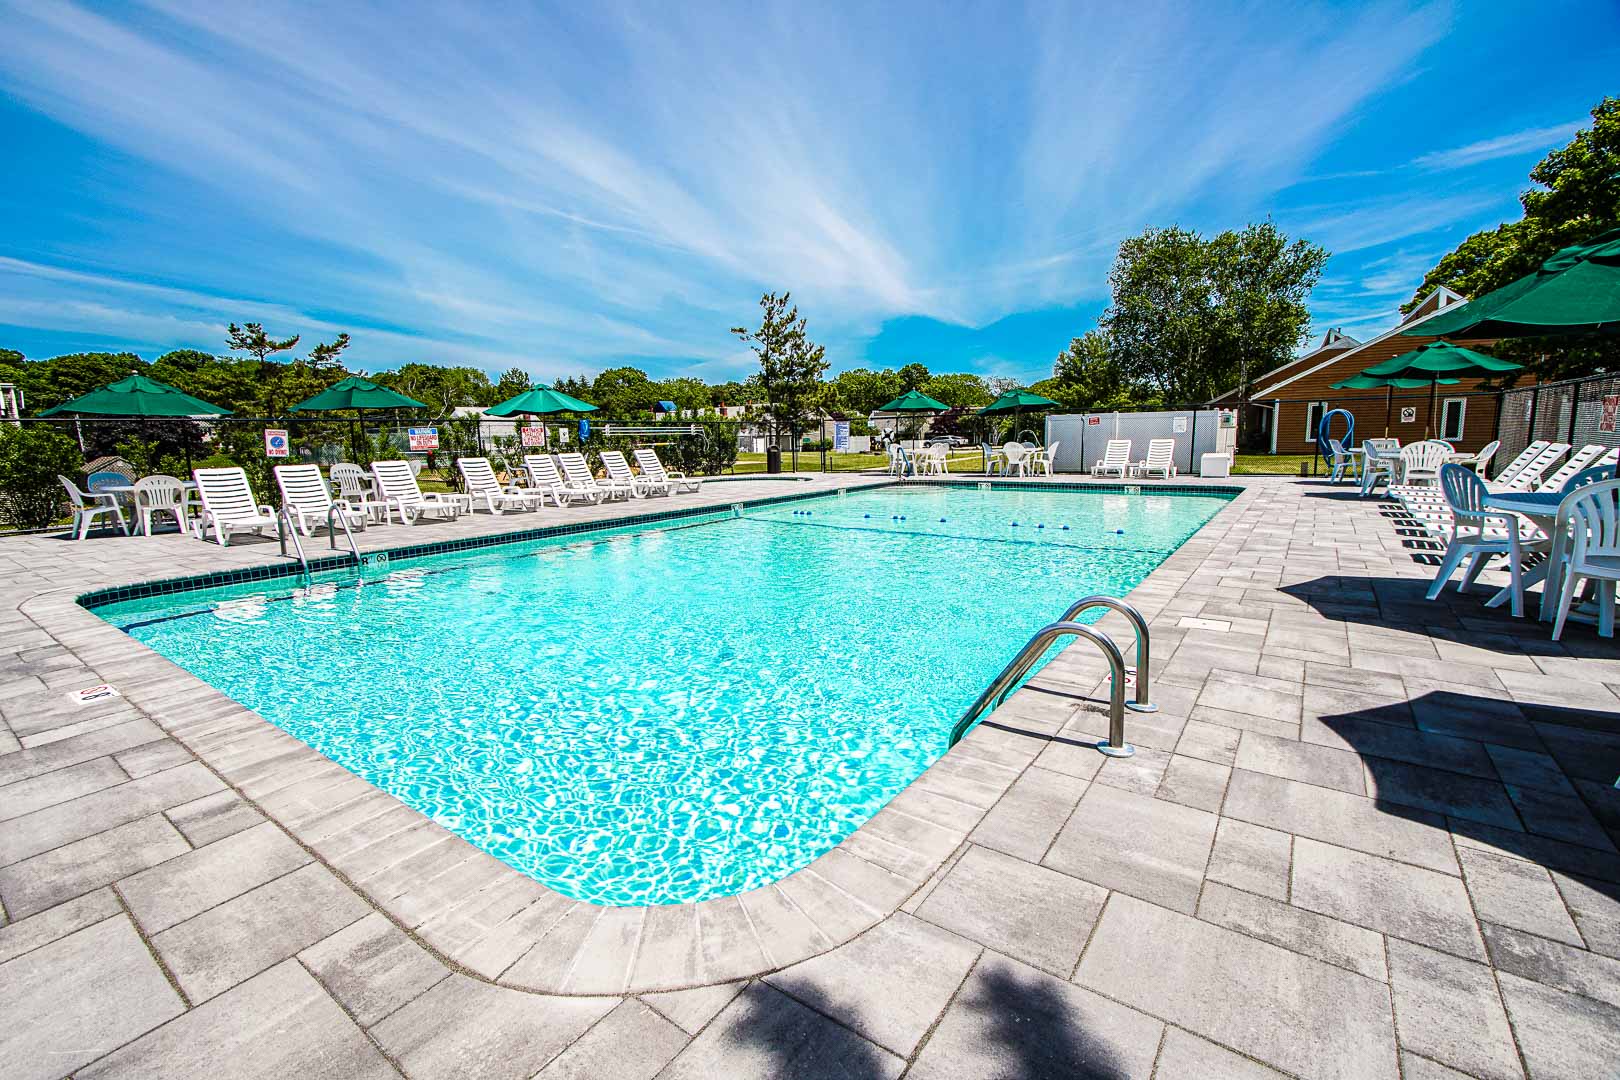 A expansive view of the outdoor swimming pool at VRI's Brewster Green Resort in Massachusetts.